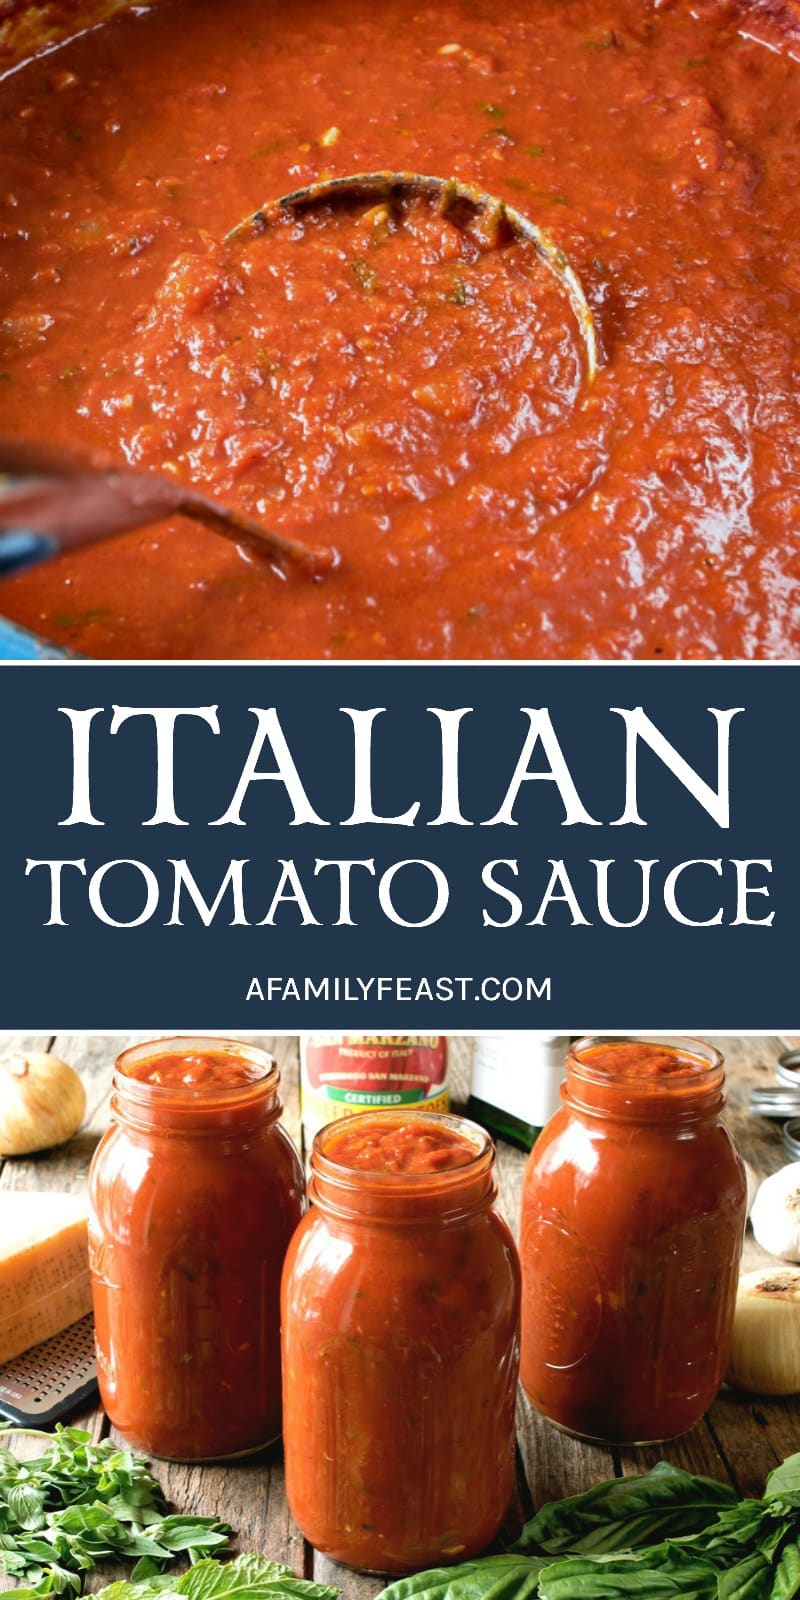 An authentic and delicious Italian Tomato Sauce that has been passed down through generations. So good, it's sure to become your family's go-to sauce recipe!